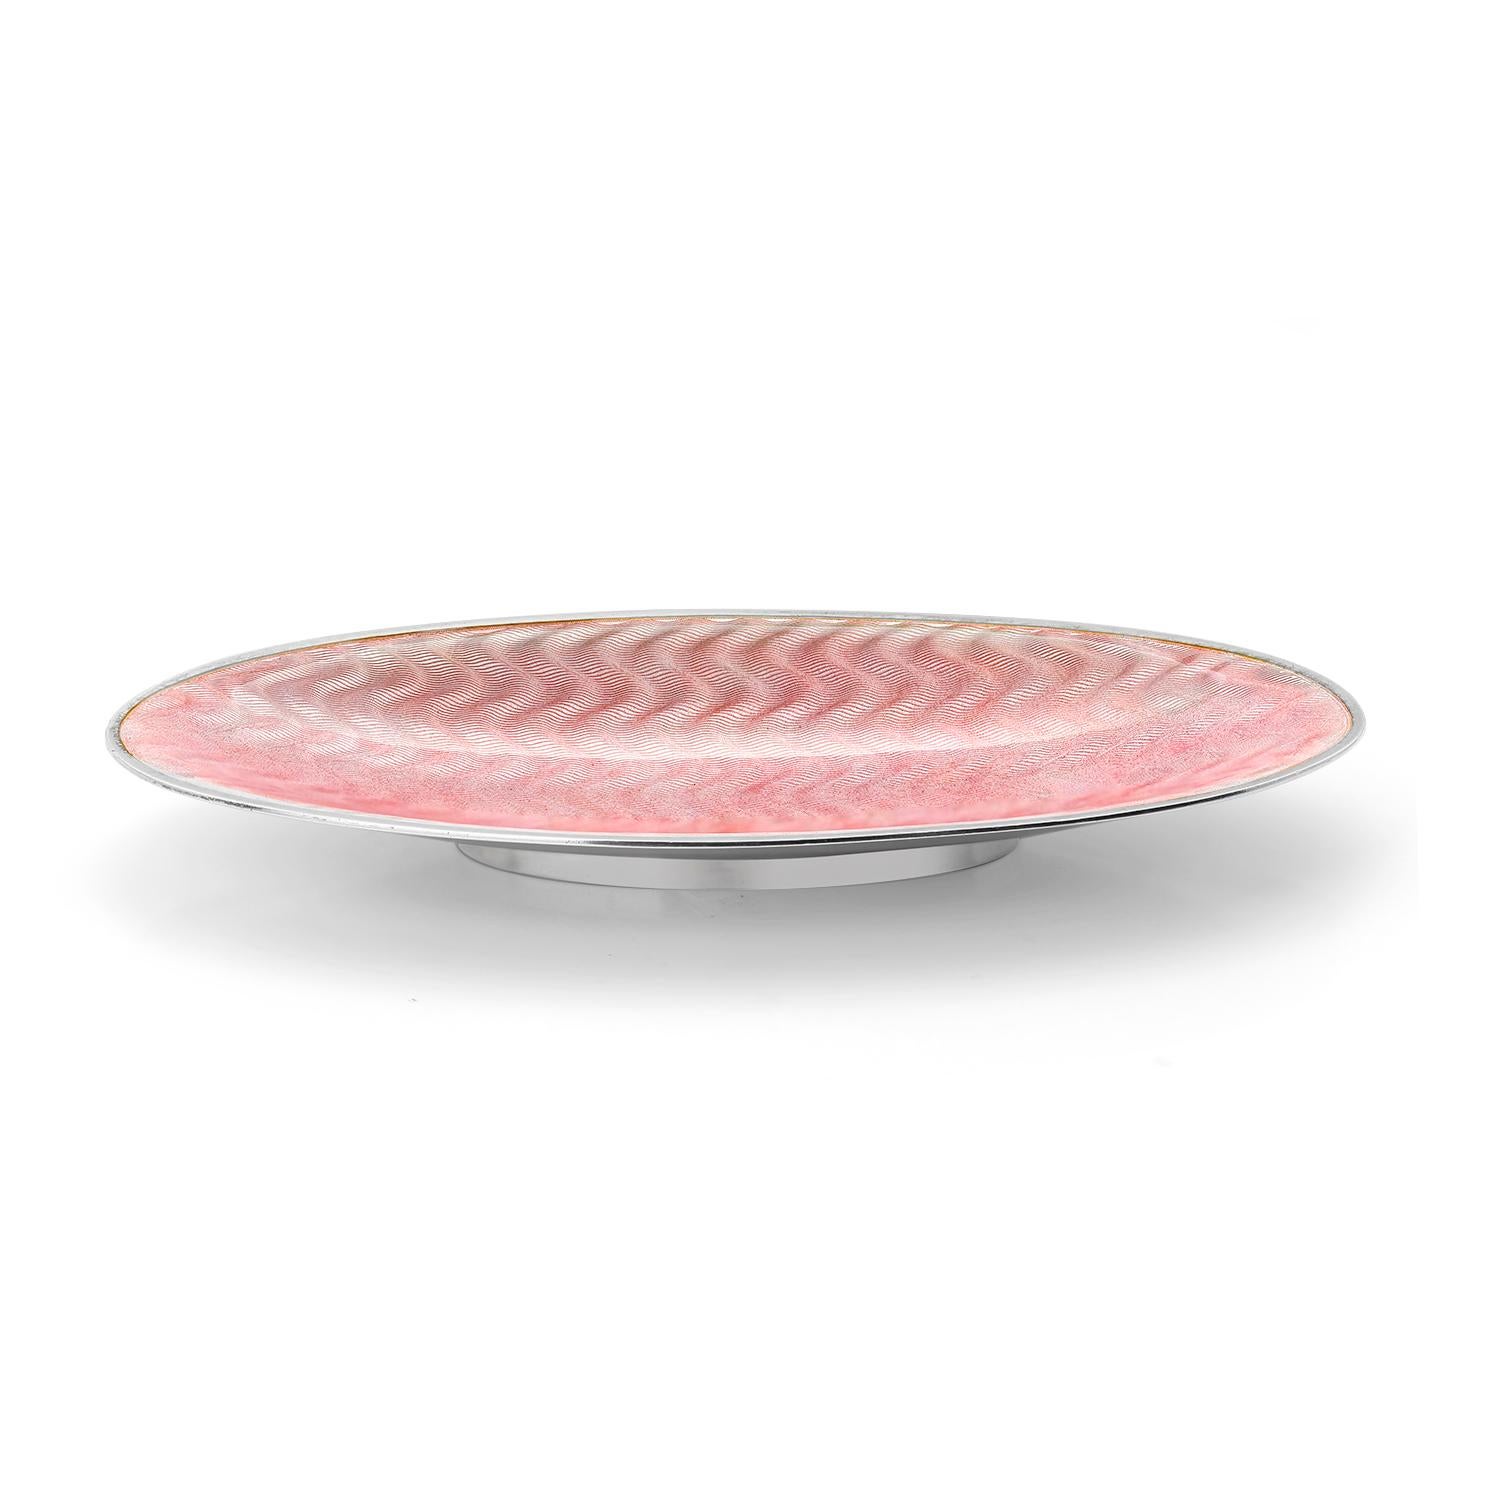 Art Deco Vintage Sterling Silver Guilloché Translucent Pink Enameled Oval Footed Pin Tray